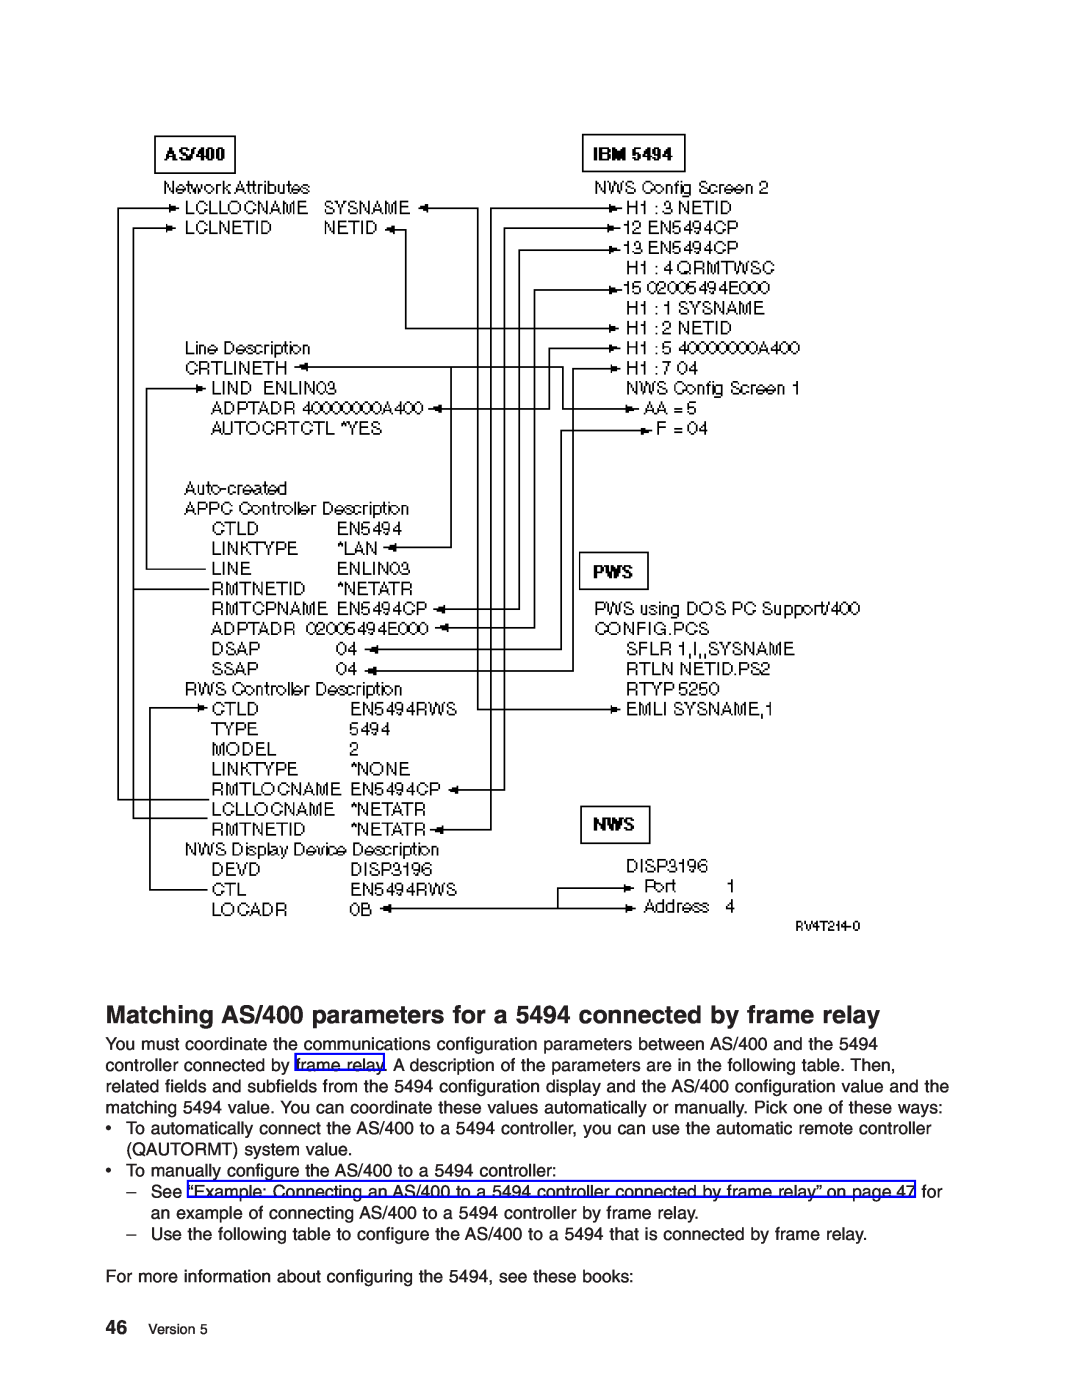 IBM manual Matching AS/400 parameters for a 5494 connected by frame relay, Version 